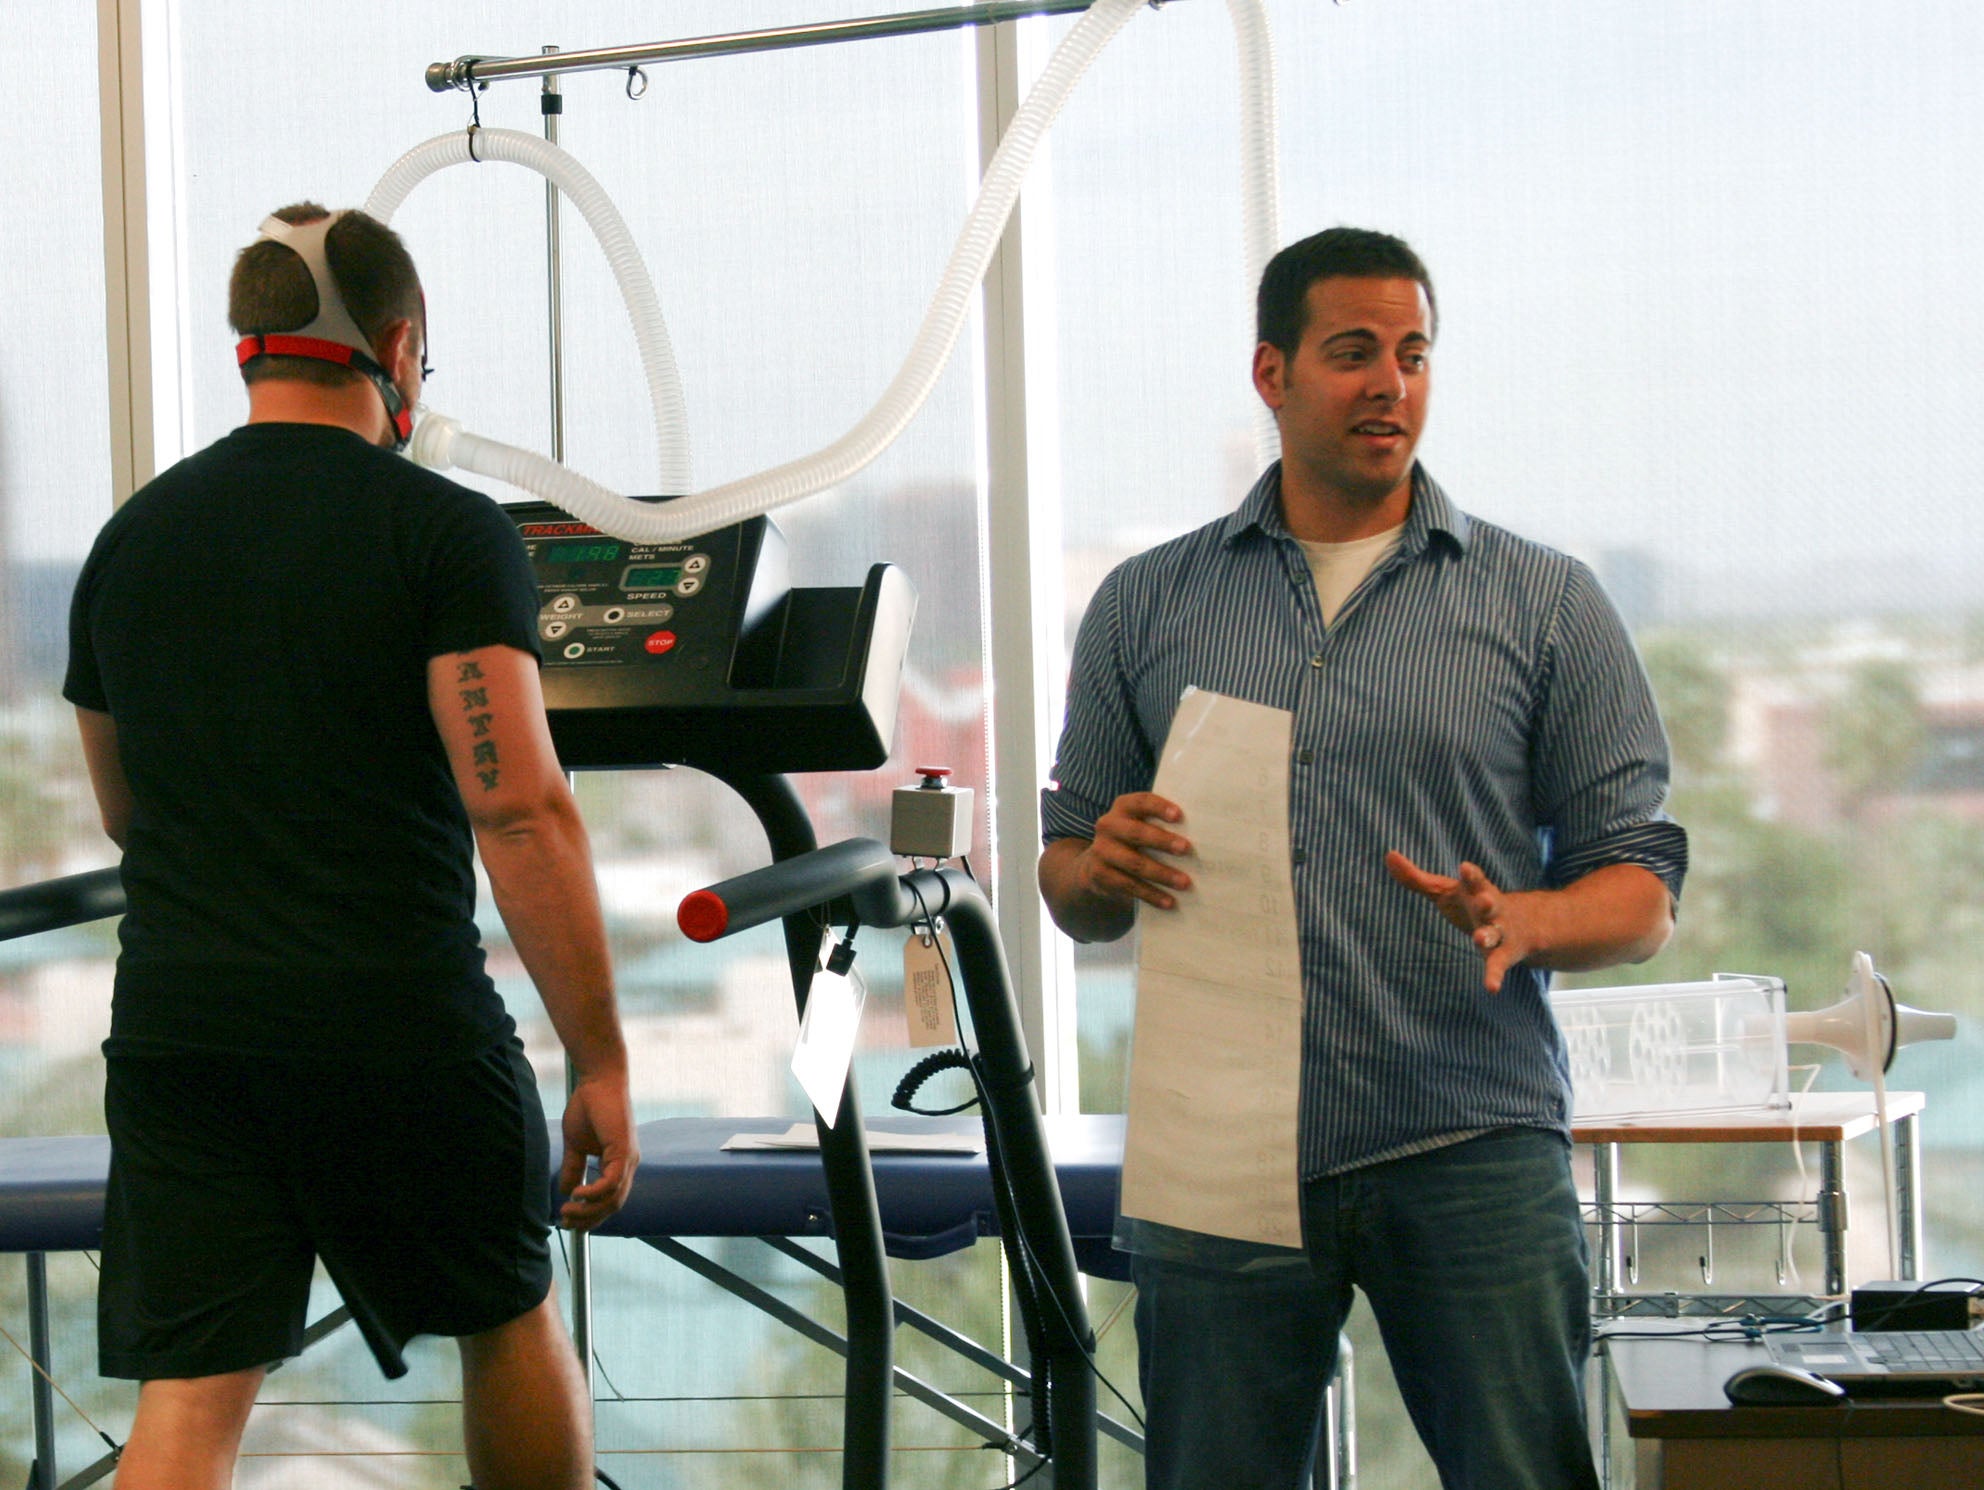 A person on a treadmill hooked up to monitoring equipment as a faculty member observes